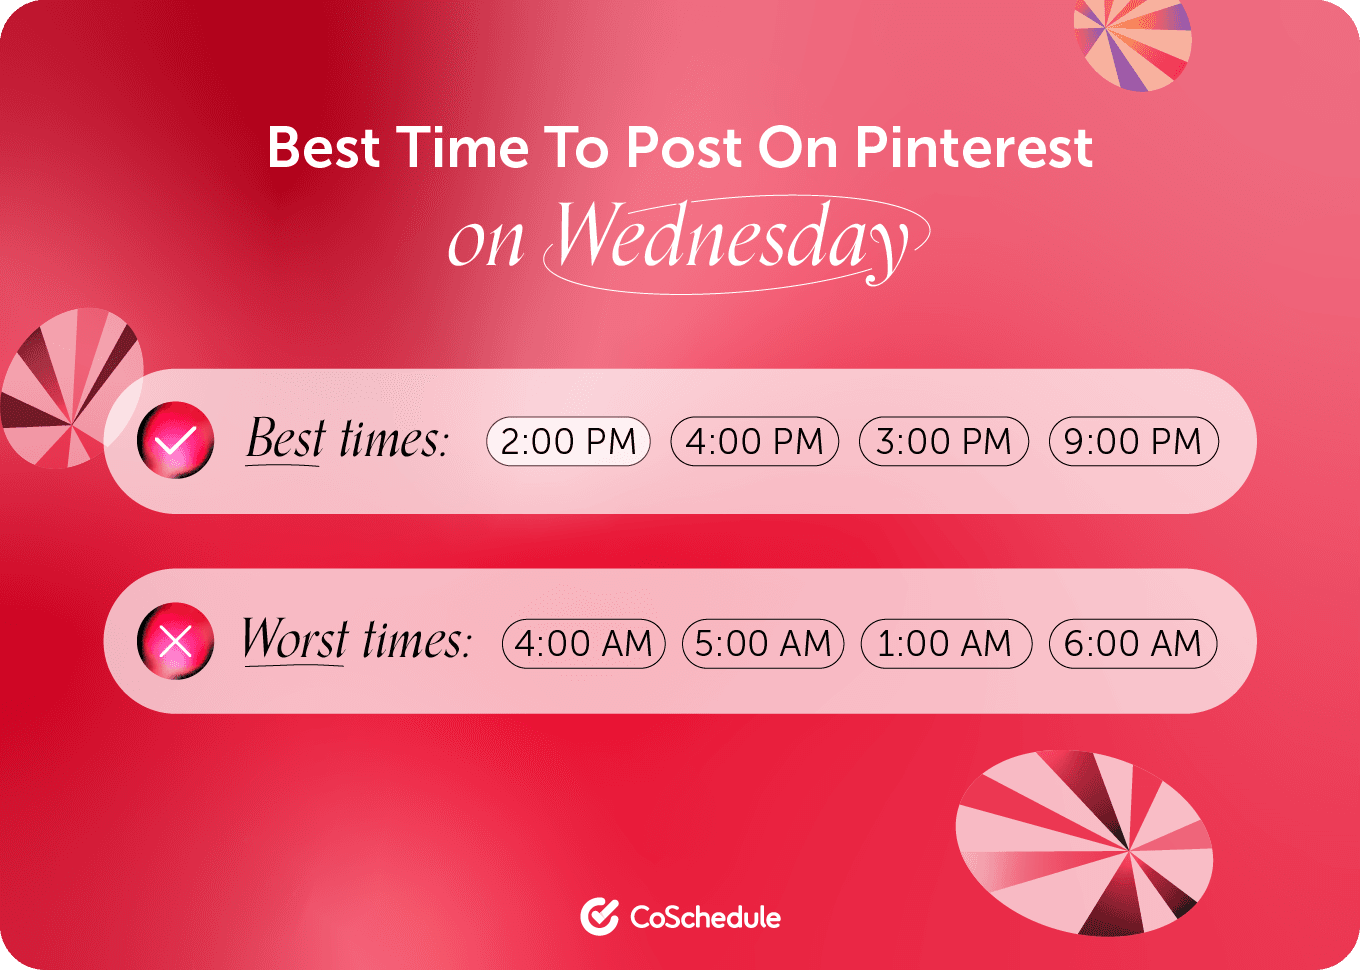 CoSchedule graphic on the best times to post on Pinterest Wednesday